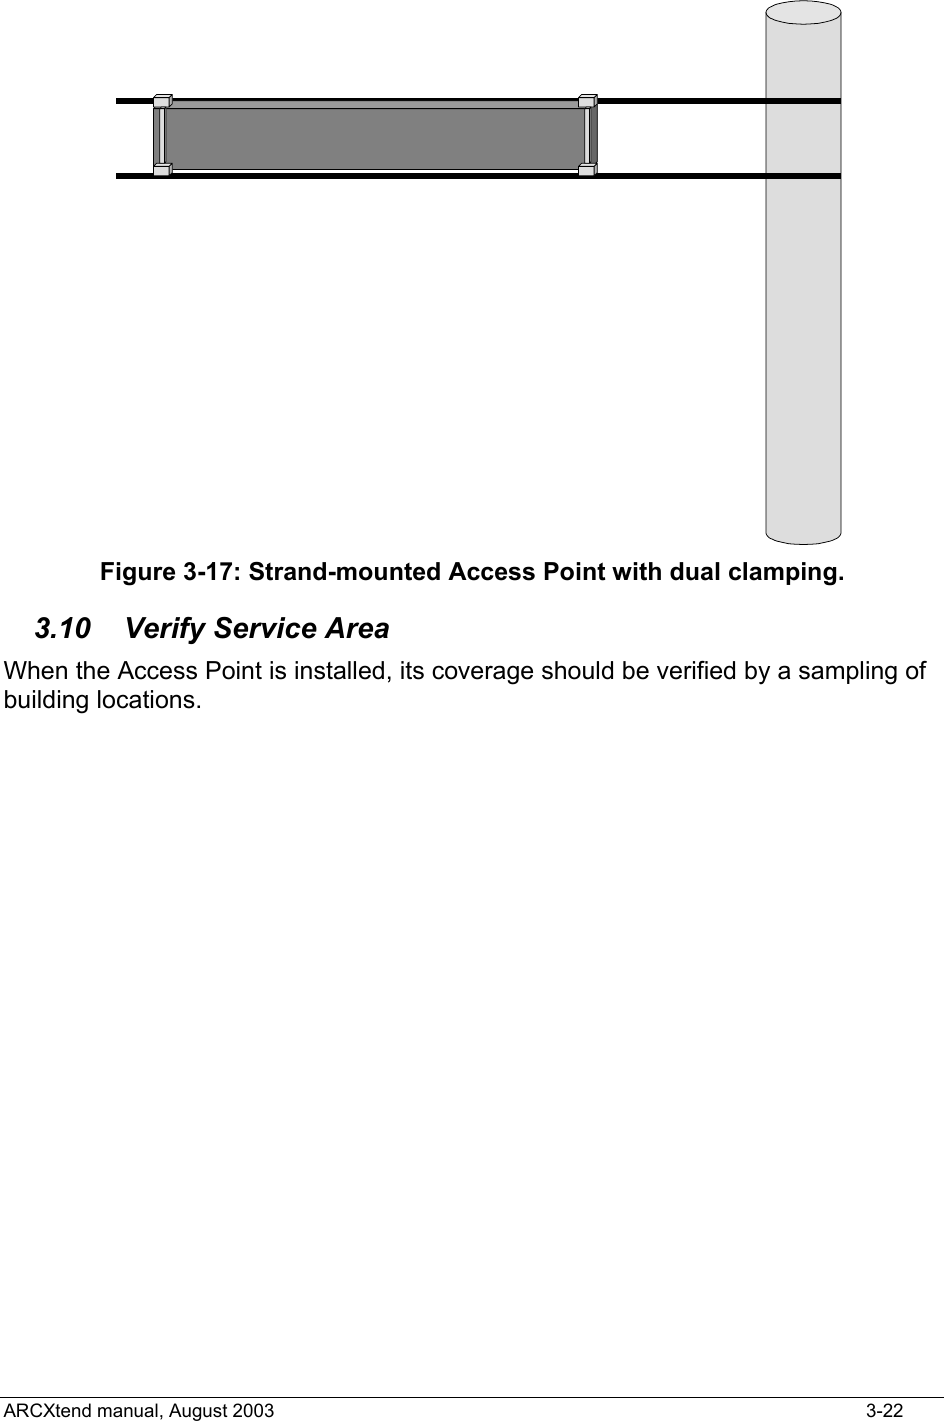   Figure 3-17: Strand-mounted Access Point with dual clamping. 3.10  Verify Service Area When the Access Point is installed, its coverage should be verified by a sampling of building locations. ARCXtend manual, August 2003    3-22 